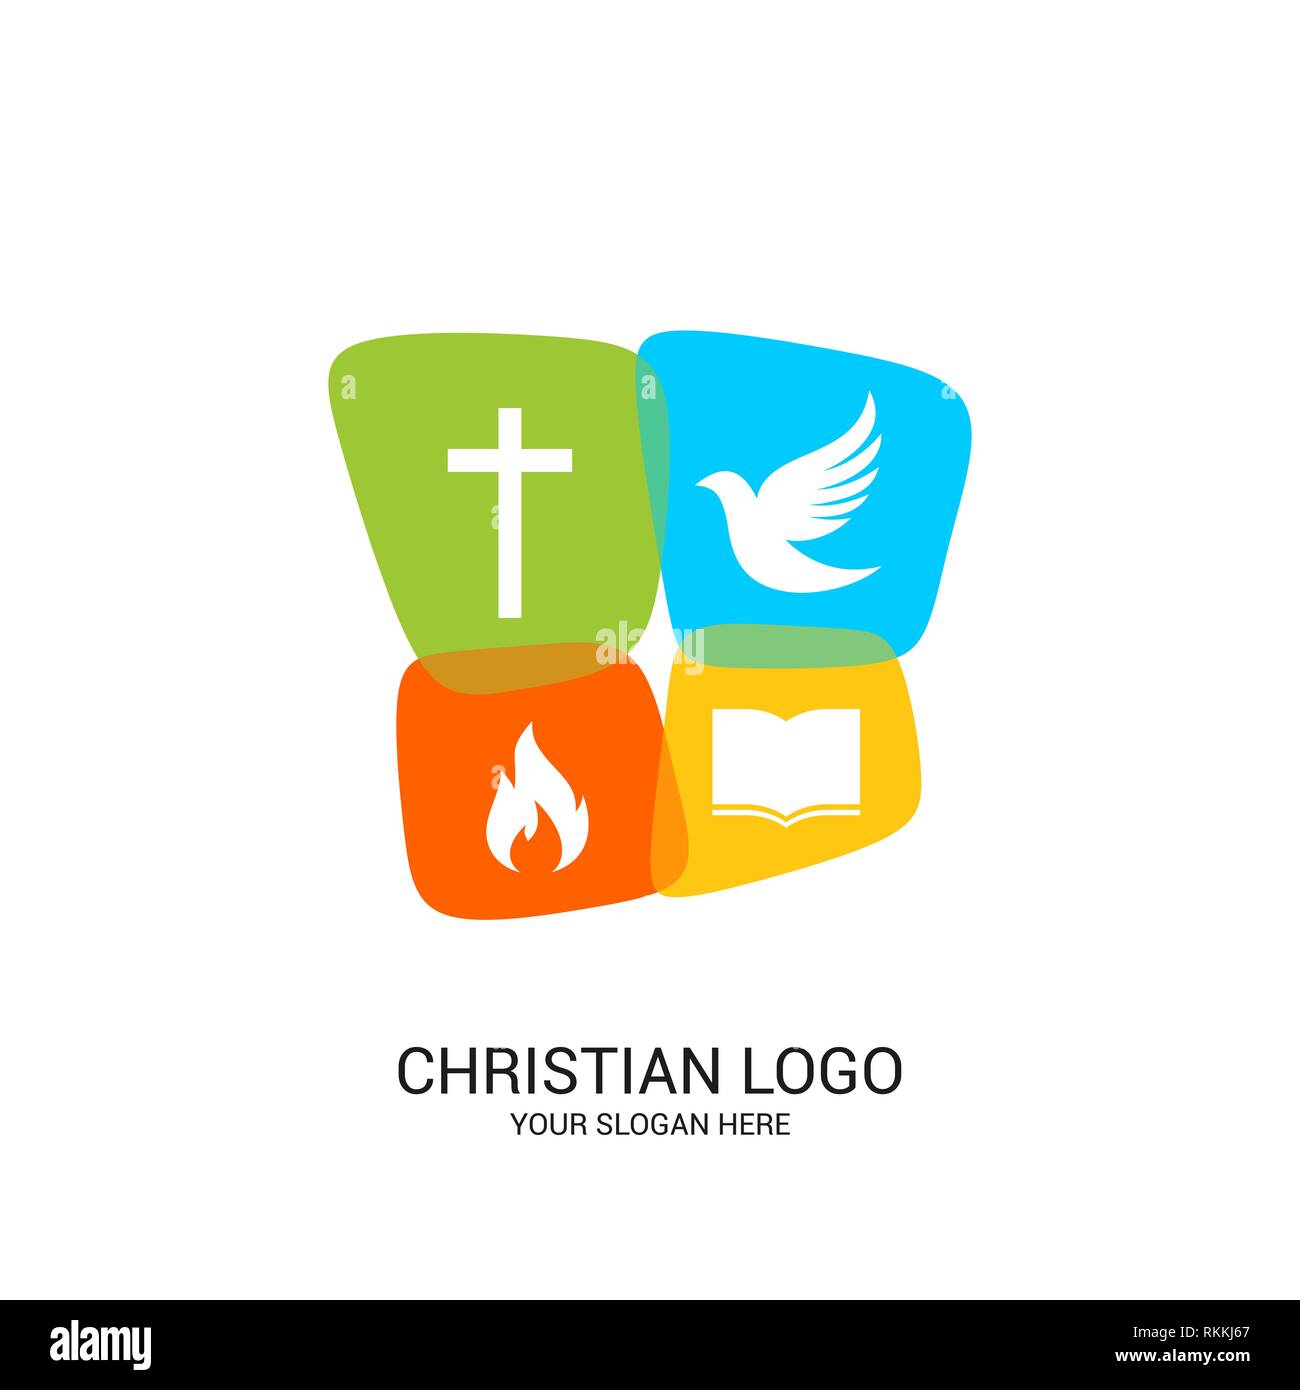 Christian Church Logo Bible Symbols Color Panels With The Image Of The Cross Dove Flame And Bible Stock Vector Image Art Alamy,Cheap Diy Christmas Gifts For Mom From Daughter